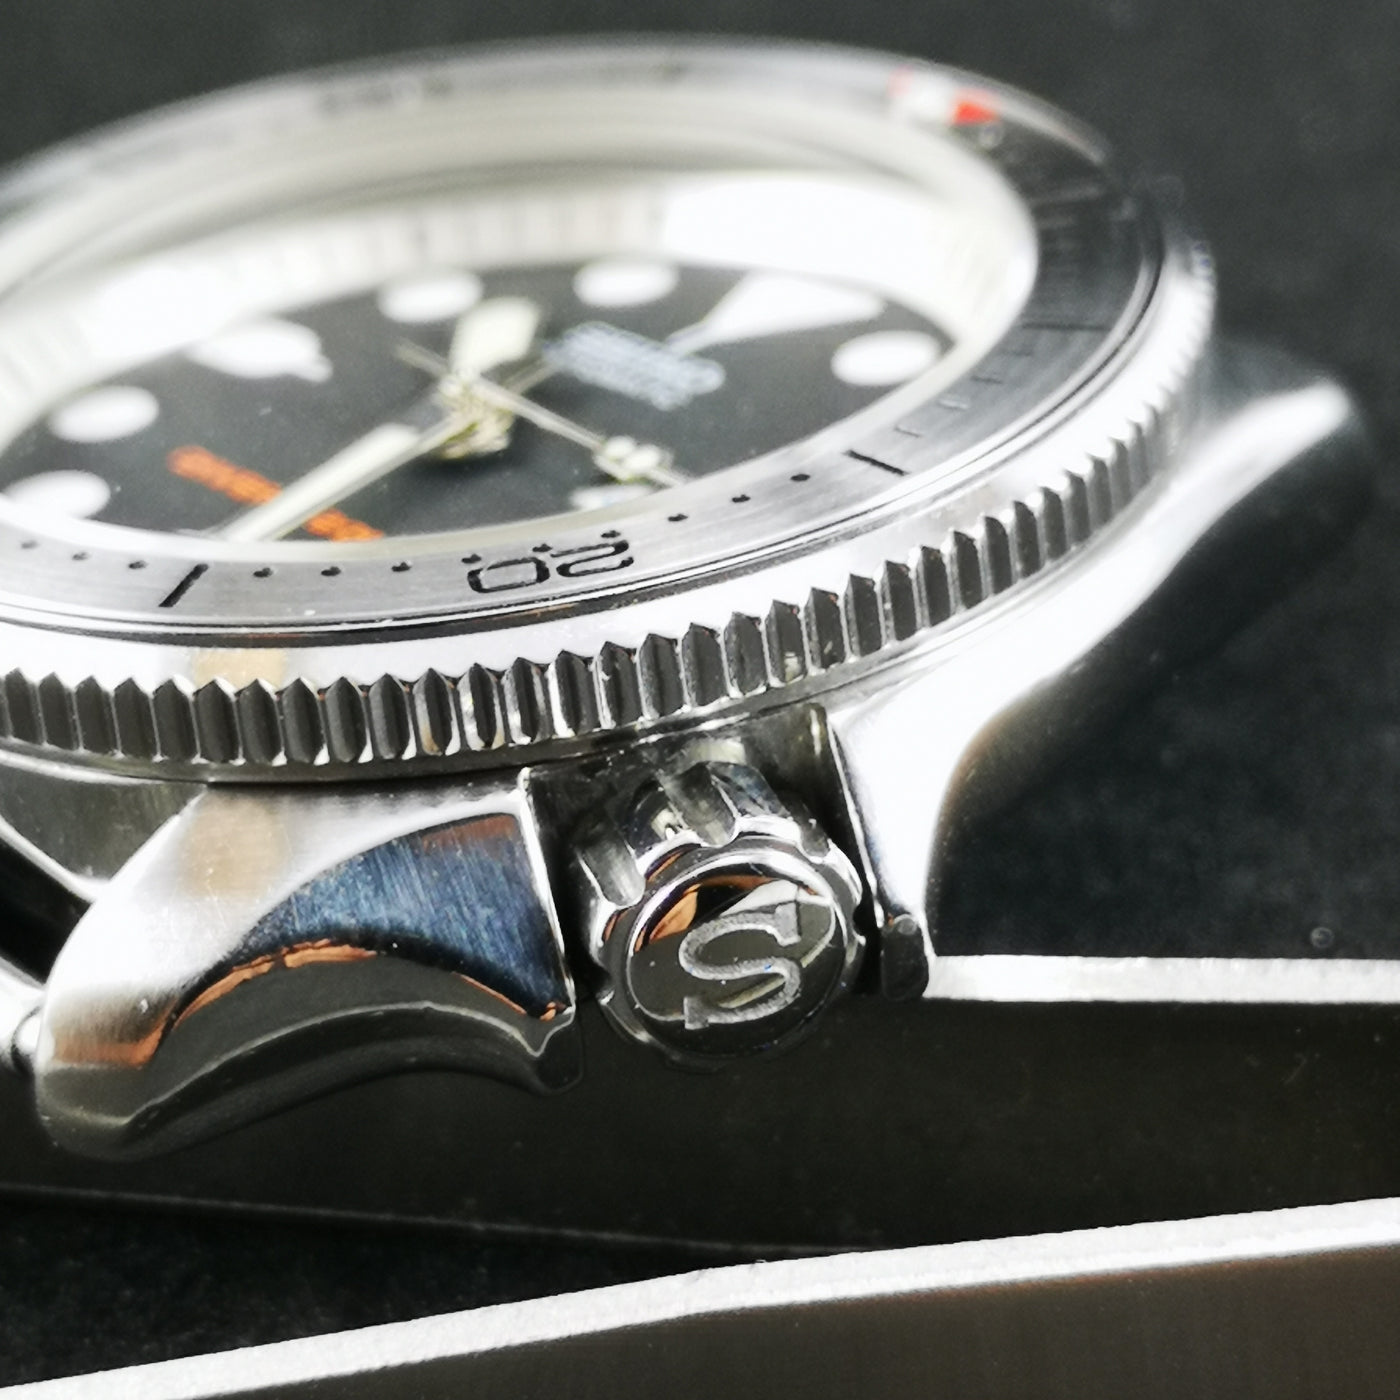 SKX007 Polished Crown "S" - Watch&Style